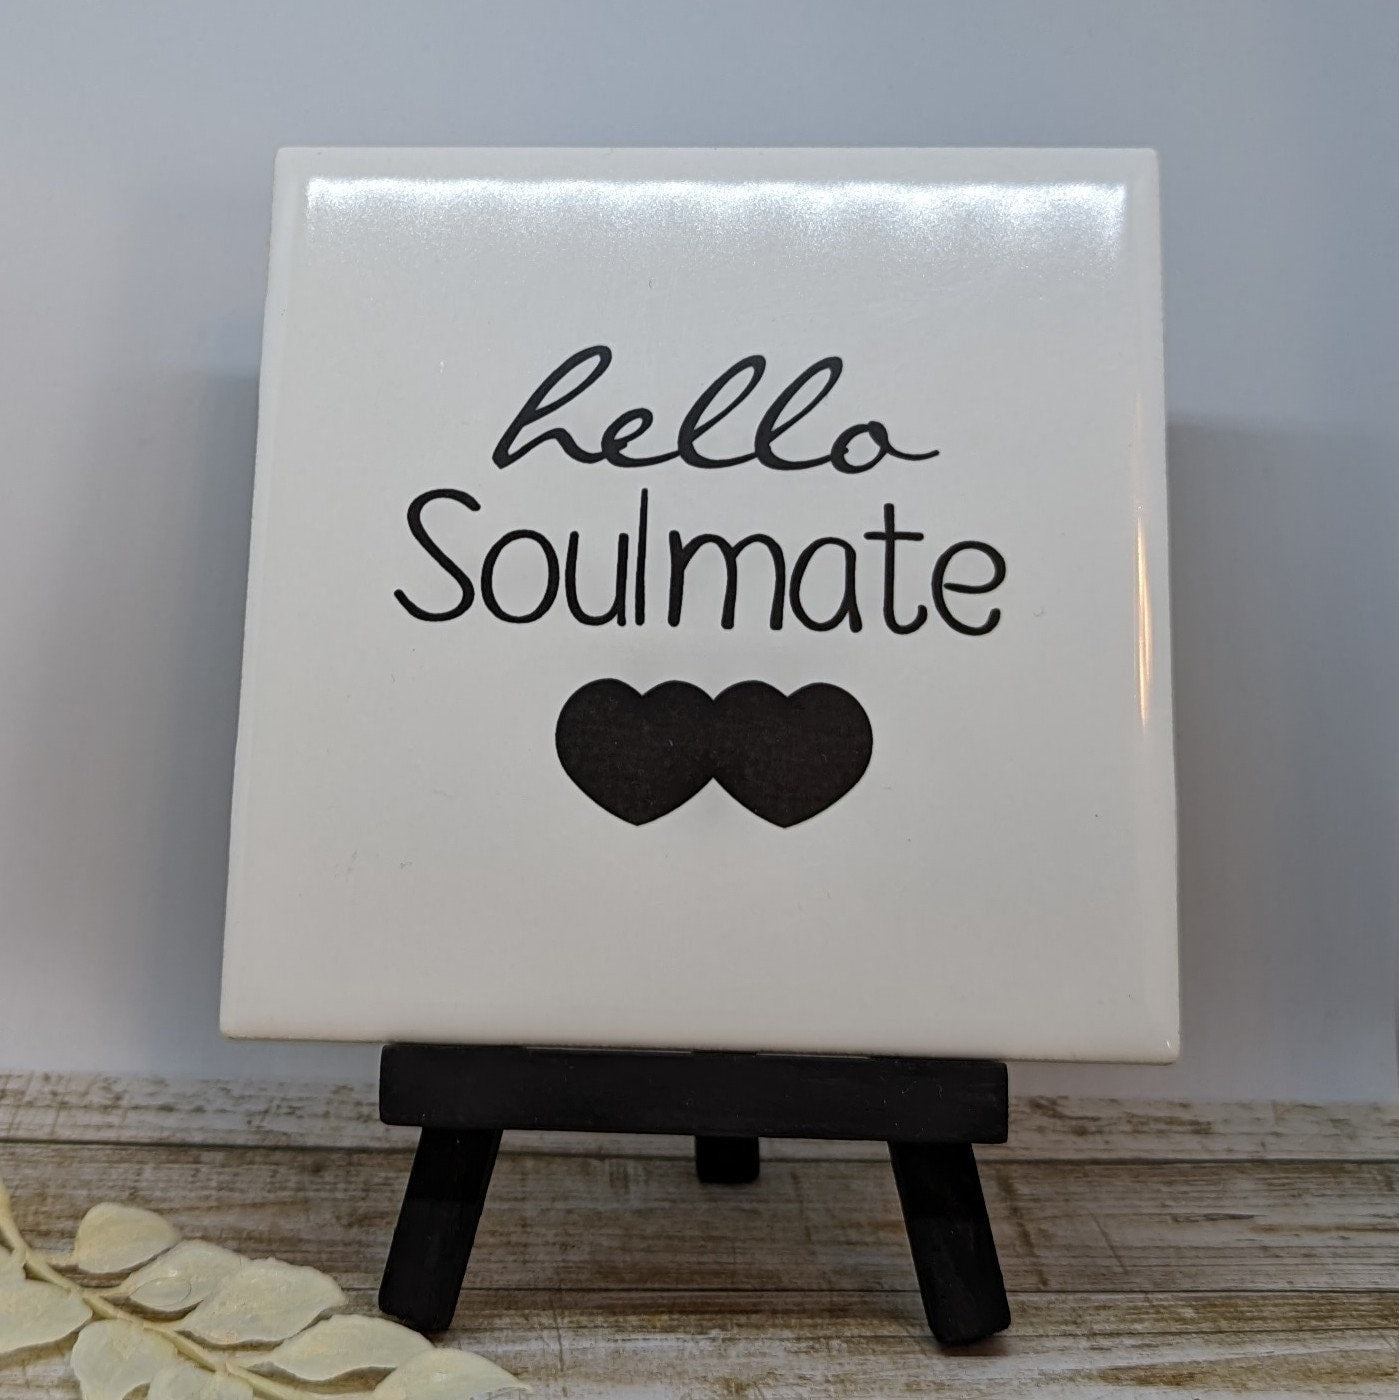 Hello Soulmate Mini Easel Sign - easel included, your color choice